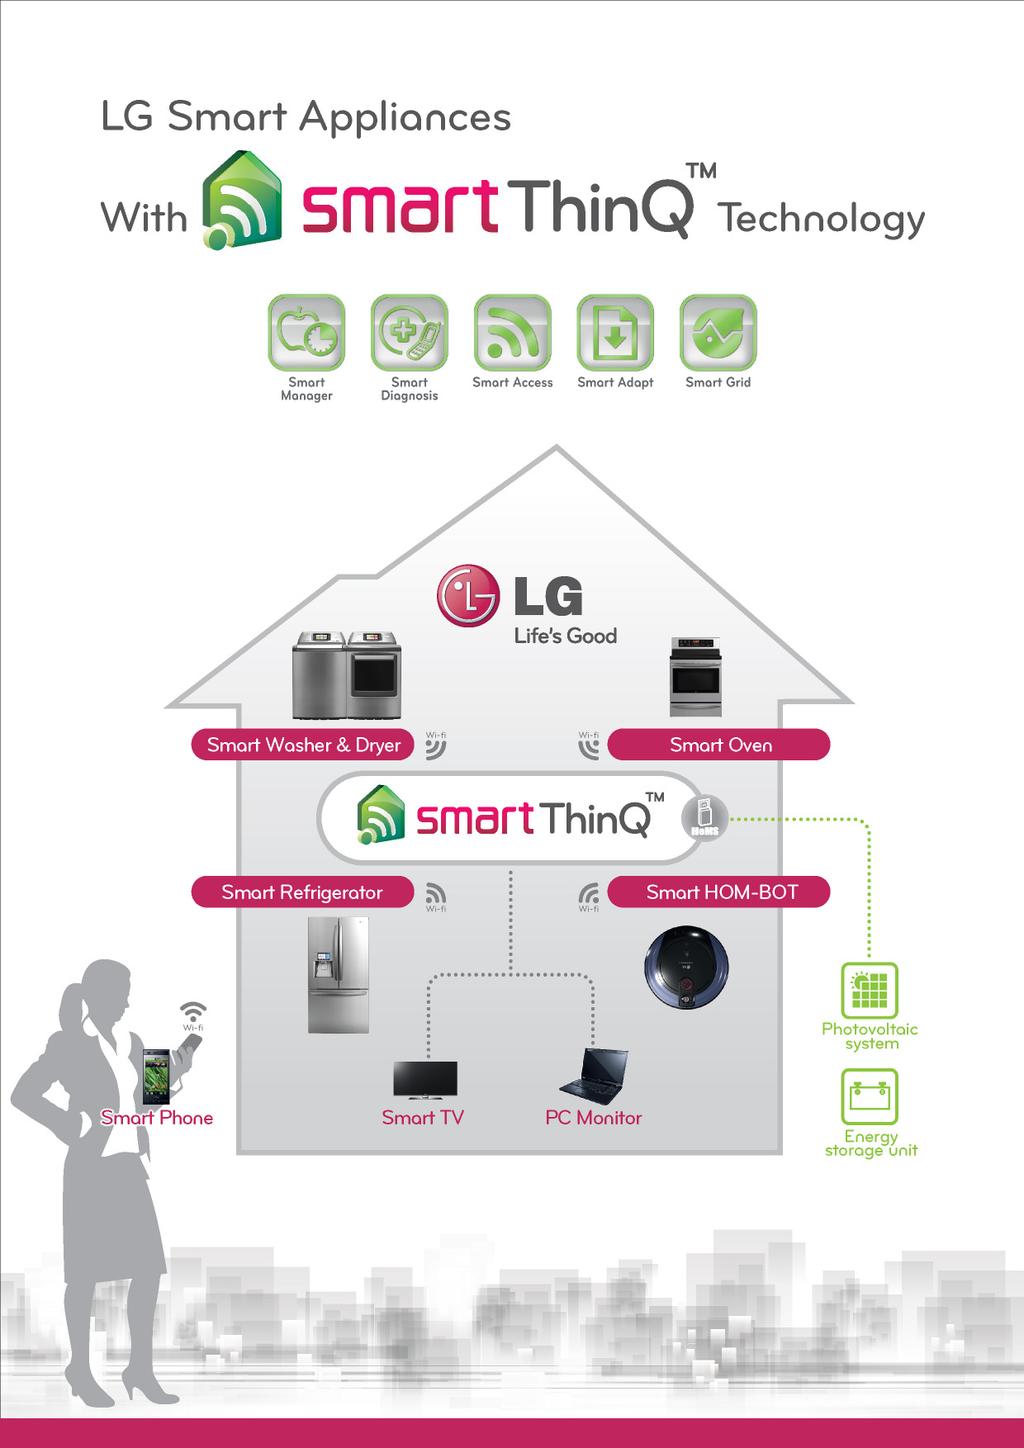 LG TO UNVEIL NEXT-GENERATION SMART APPLIANCES AT CES, AIMS TO REDEFINE HOUSEWORK With Upgraded Smart ThinQ Technology, New Home Energy Management System (HeMS) and Device-to-Device Connectivity, LG s